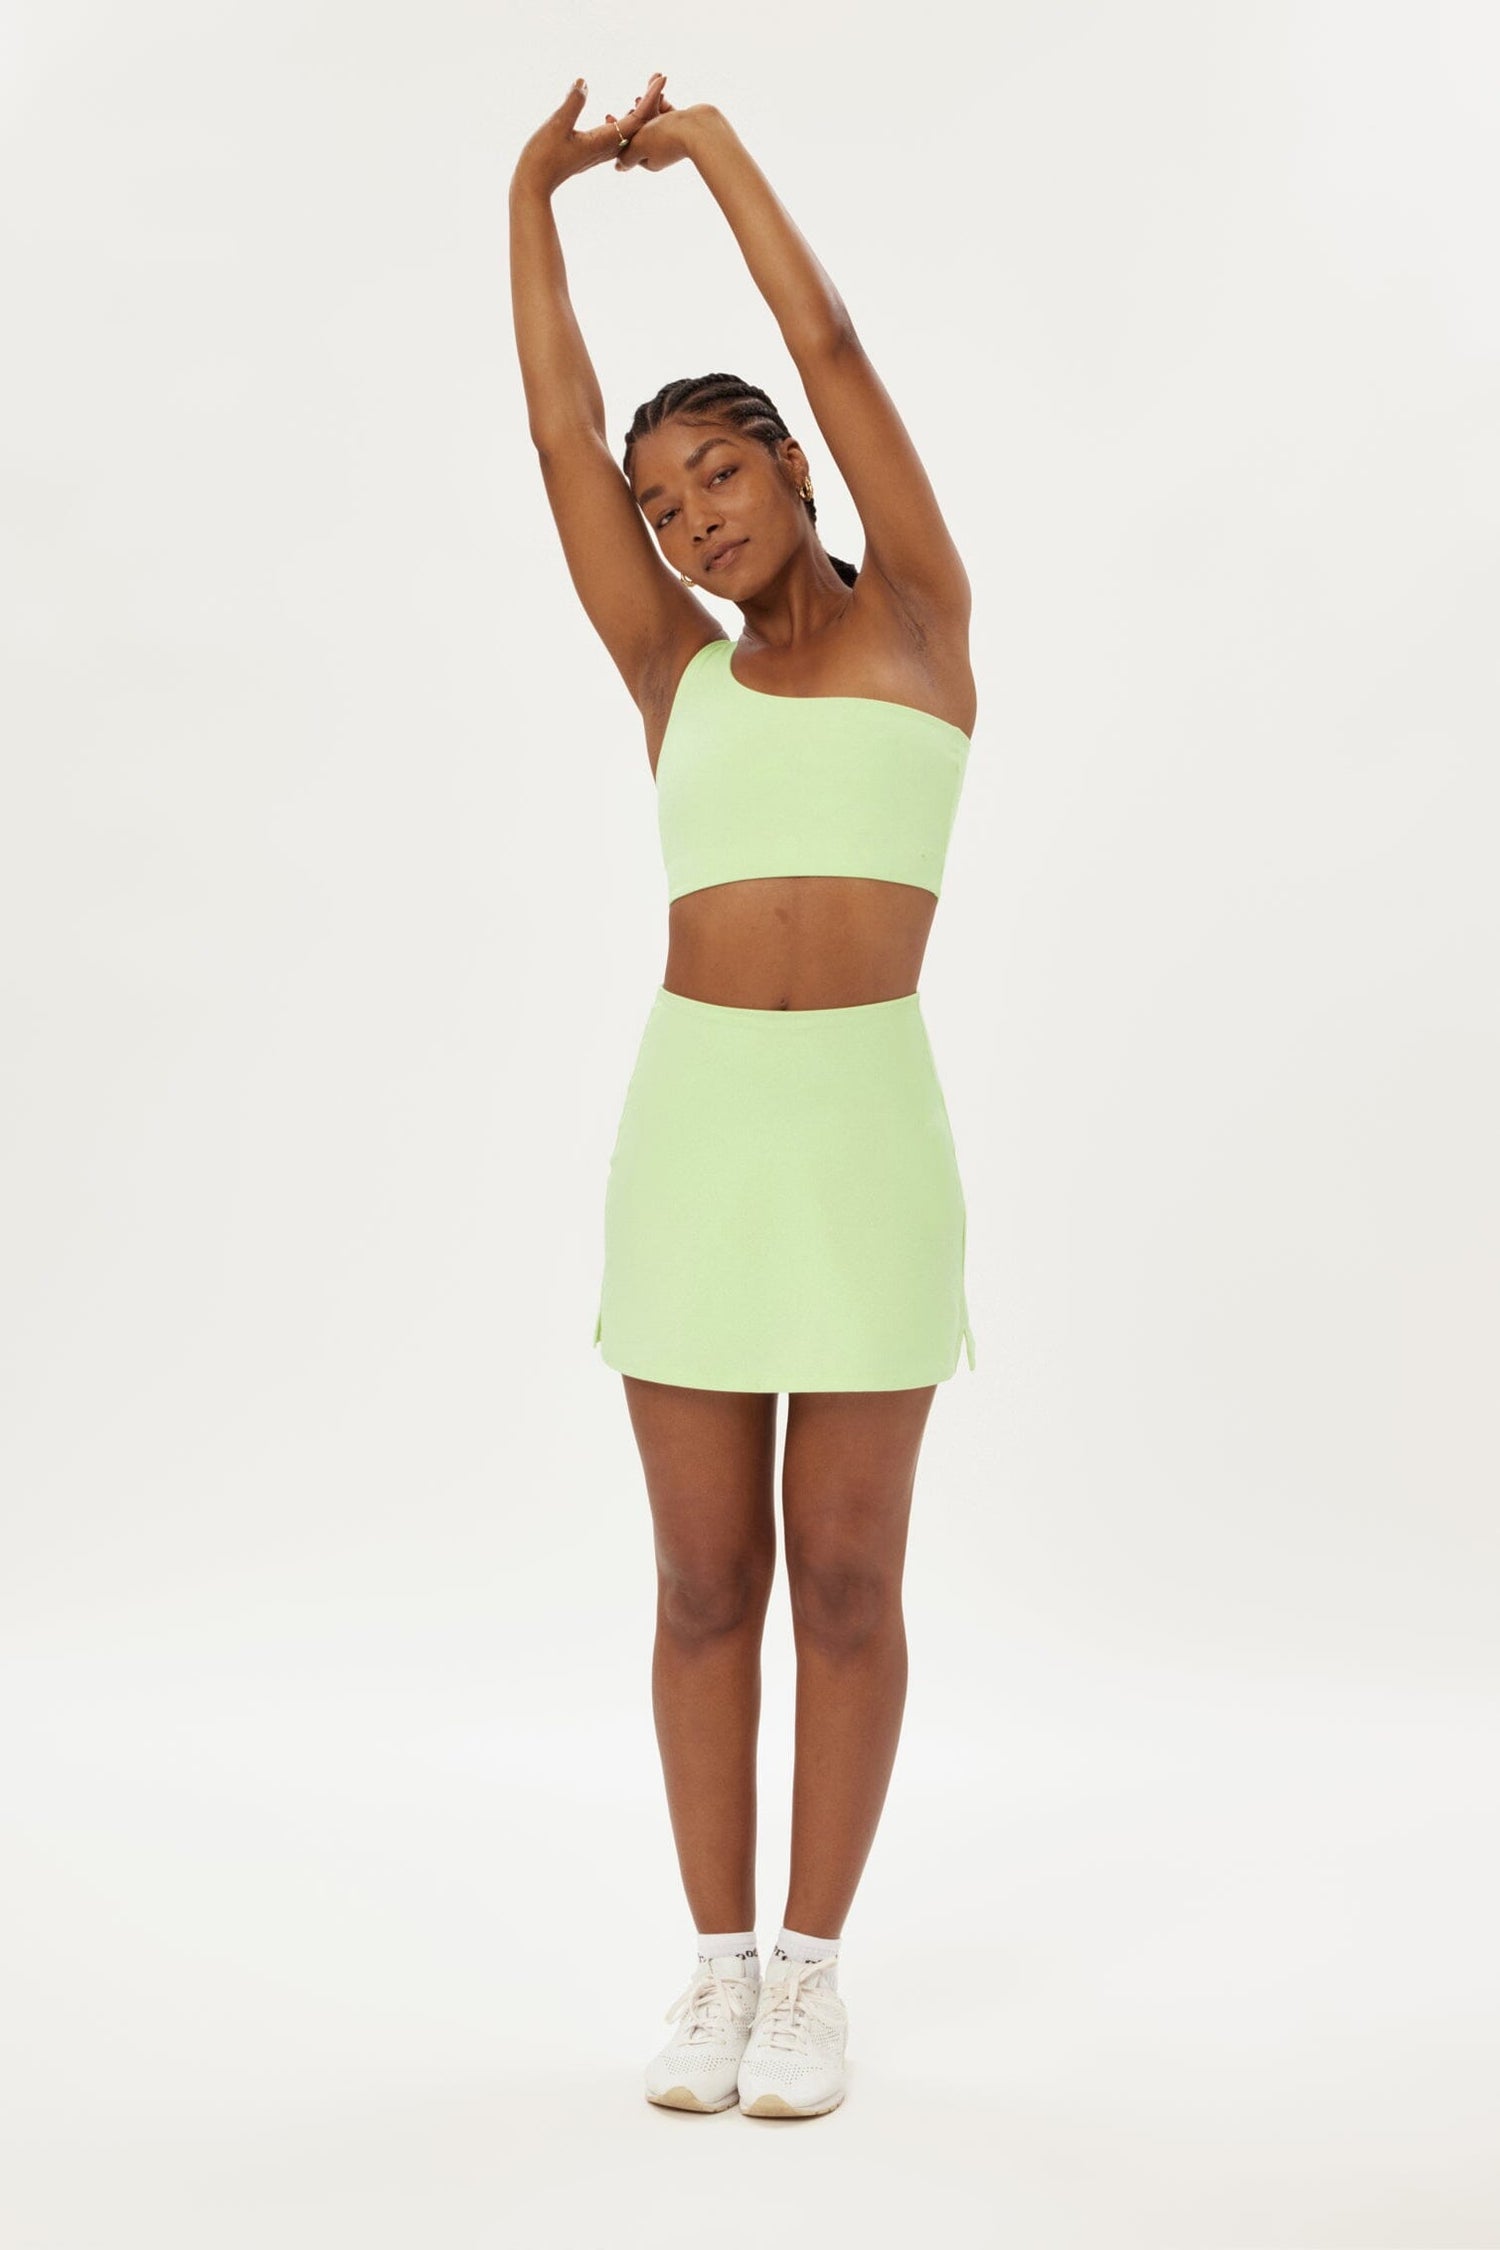 Girlfriend Collective The Skort High-Rise - Made from Recycled Plastic Bottles Green Tea Skirt